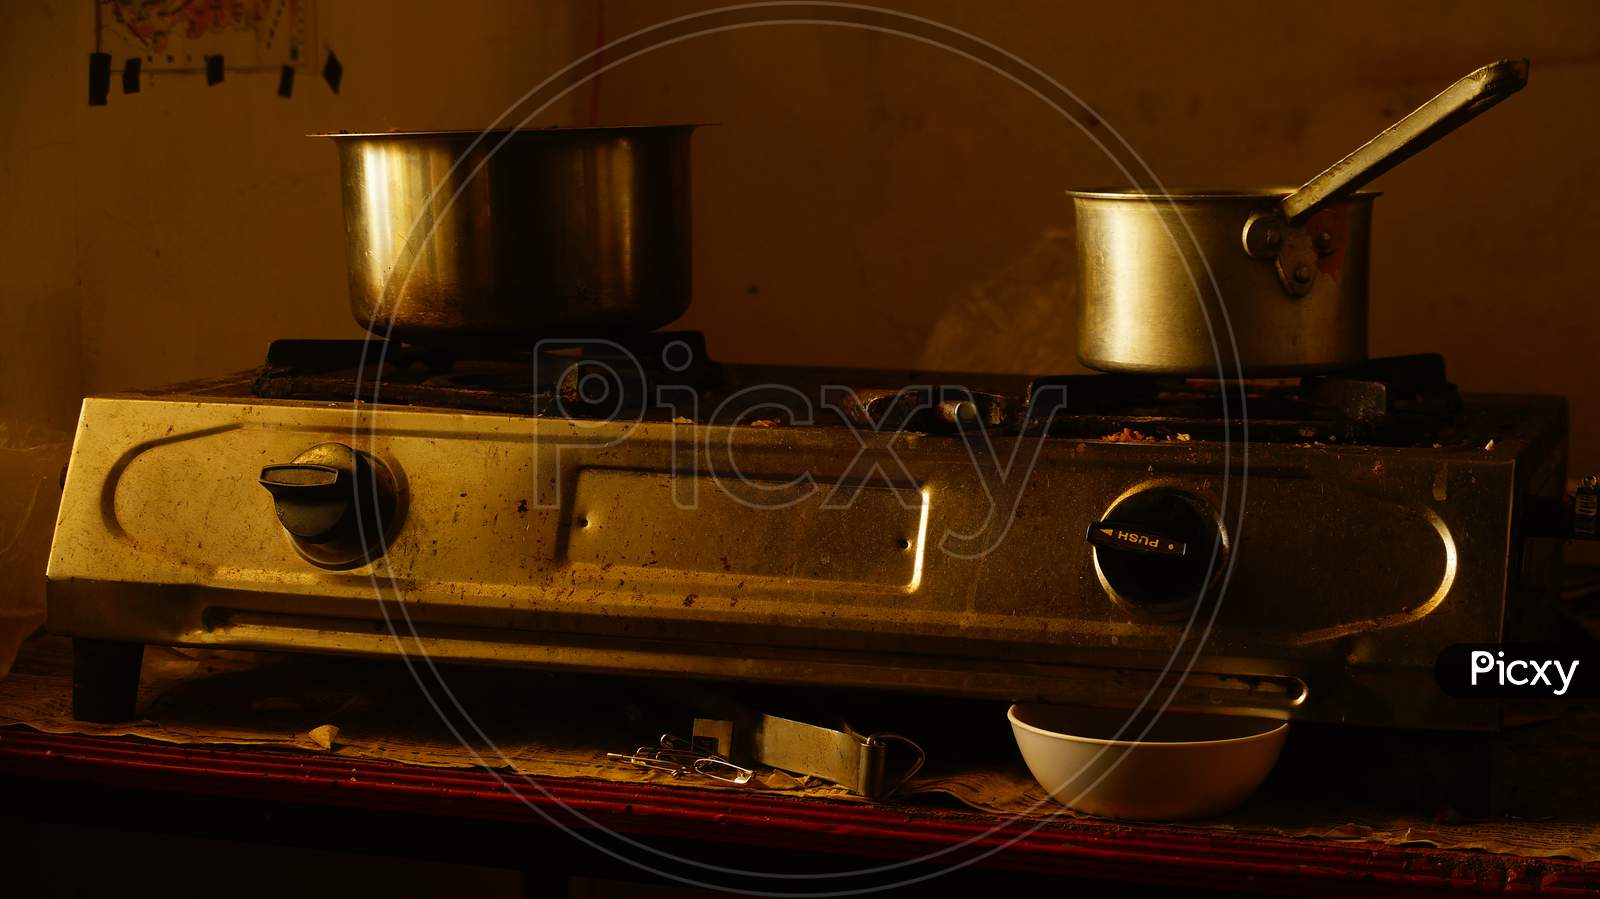 Two vessel kept on Gas Stove to boil milk and tea